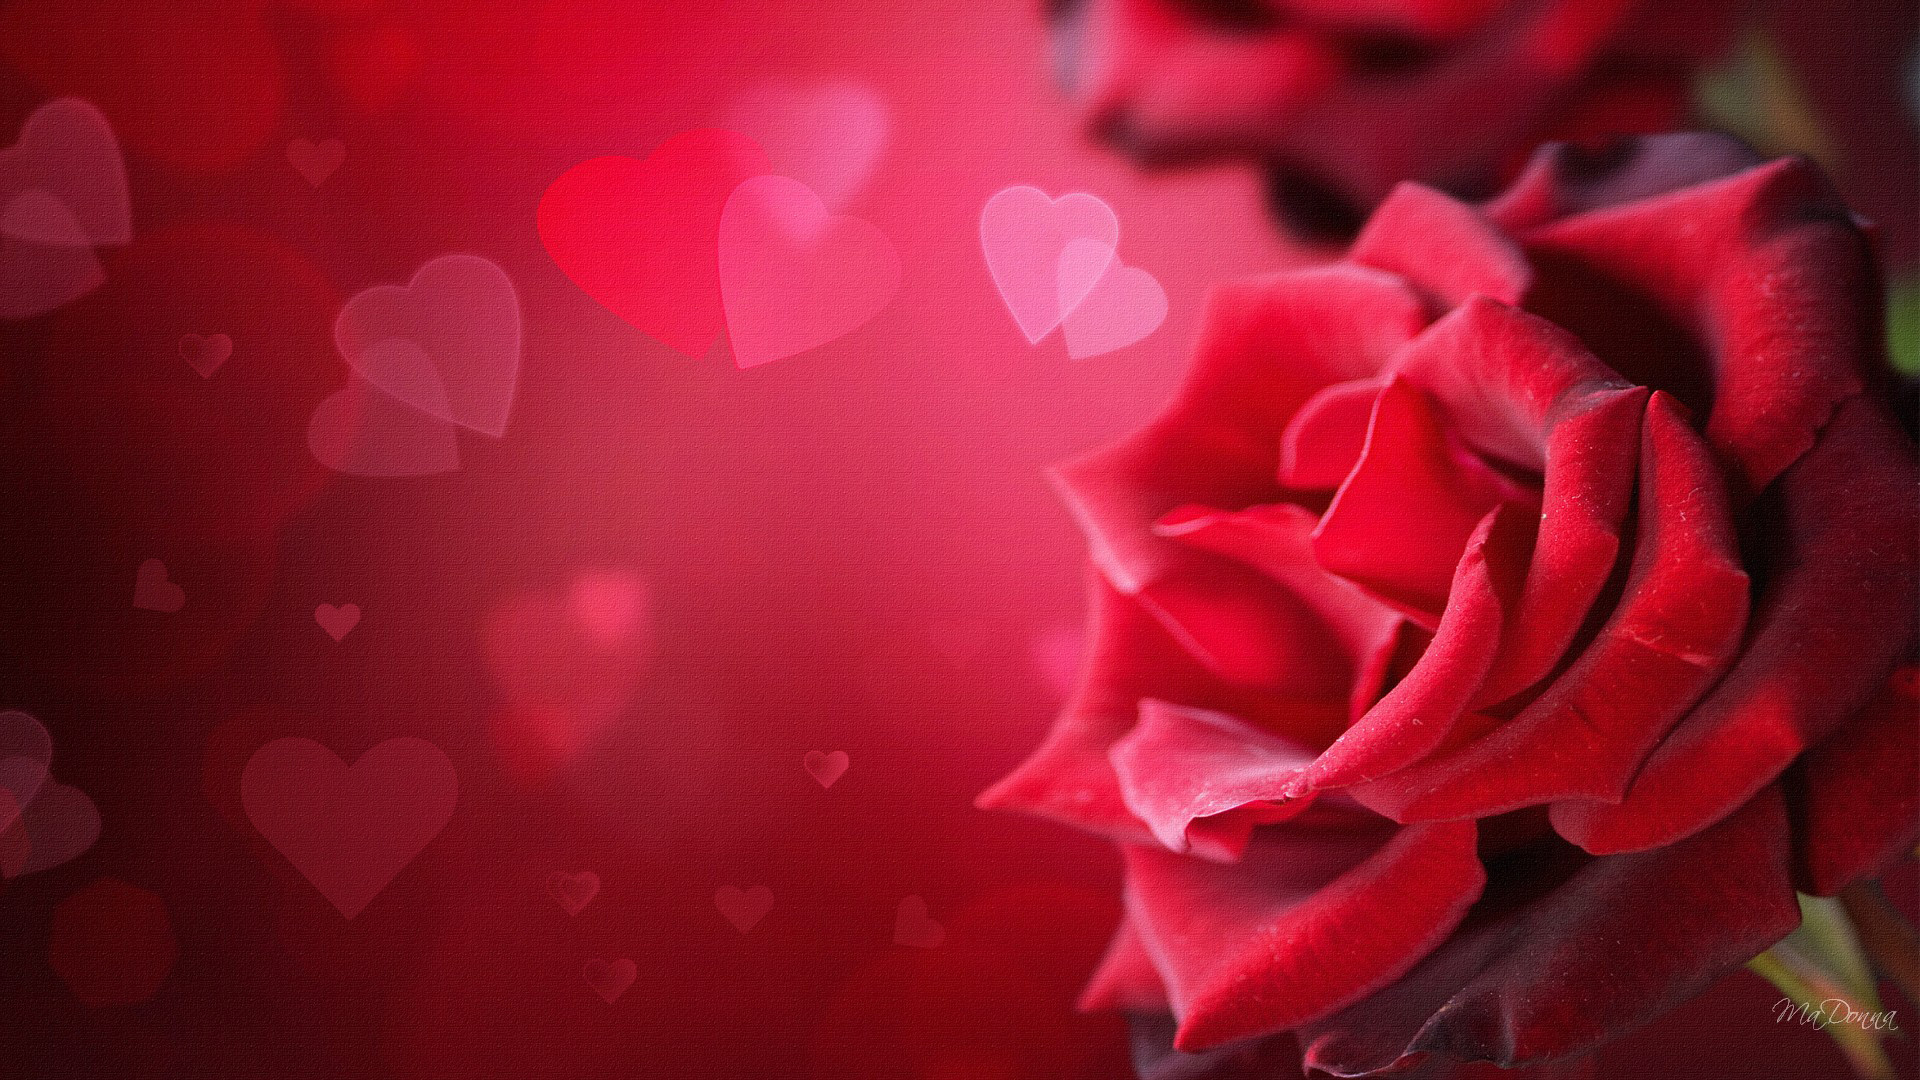 Happy Valentine's Day Check Out More Exciting HD Wallpapers, Covers, and  DPs for Social